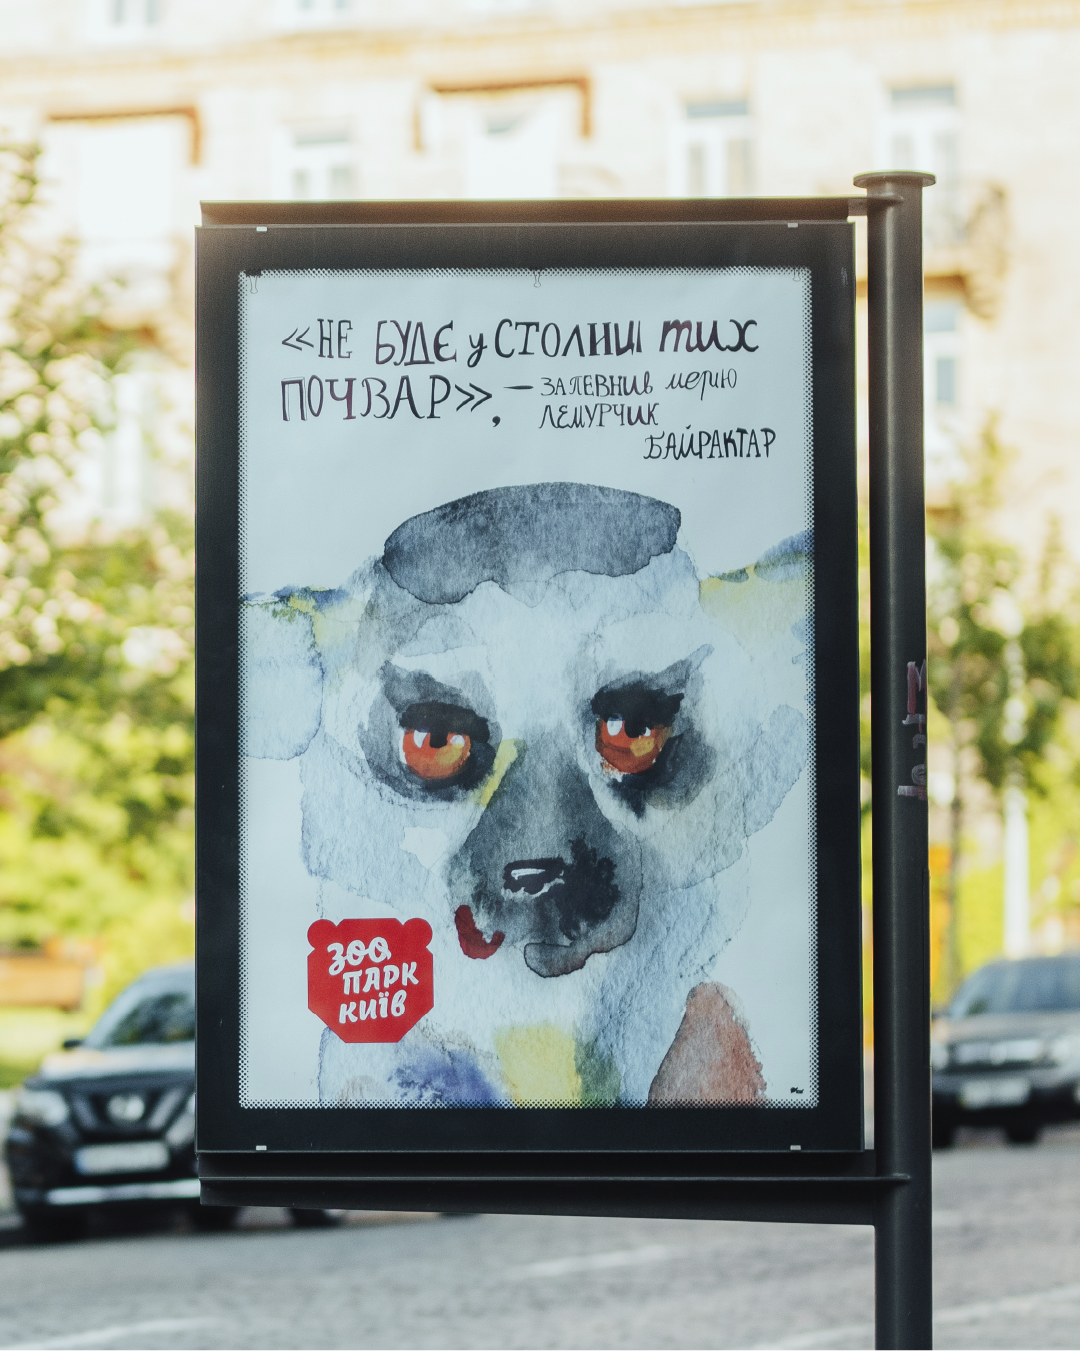 Campaign by Kyiv Zoo to support rescued animals